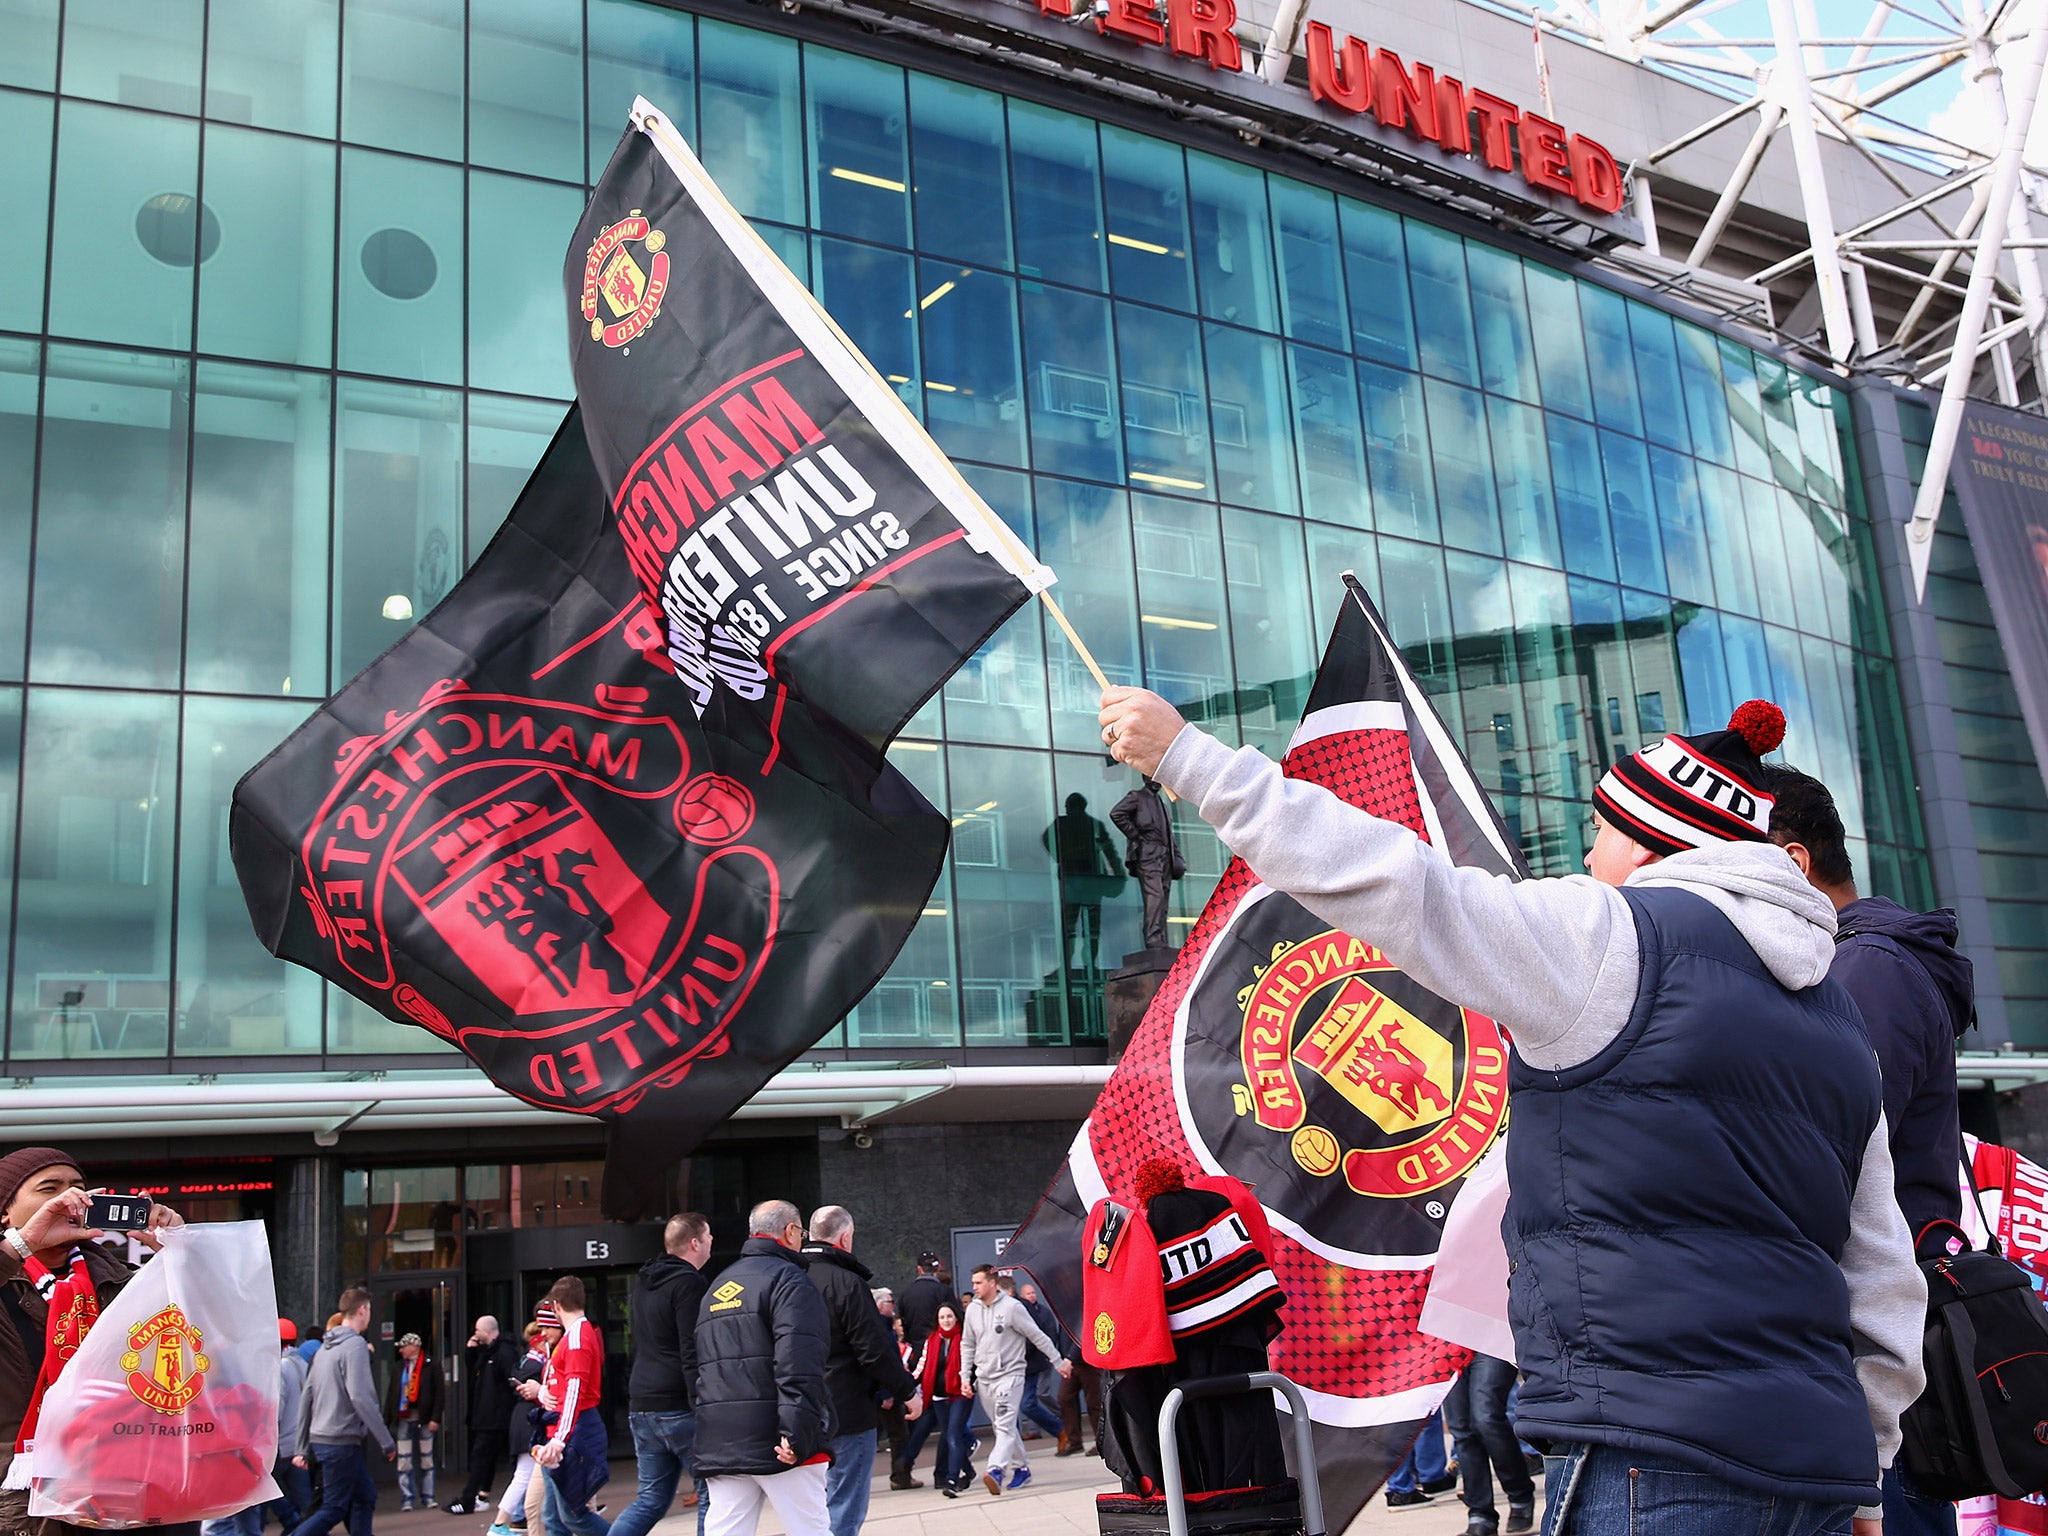 Manchester United fans have been given a warning ahead of the trip to Rotterdam